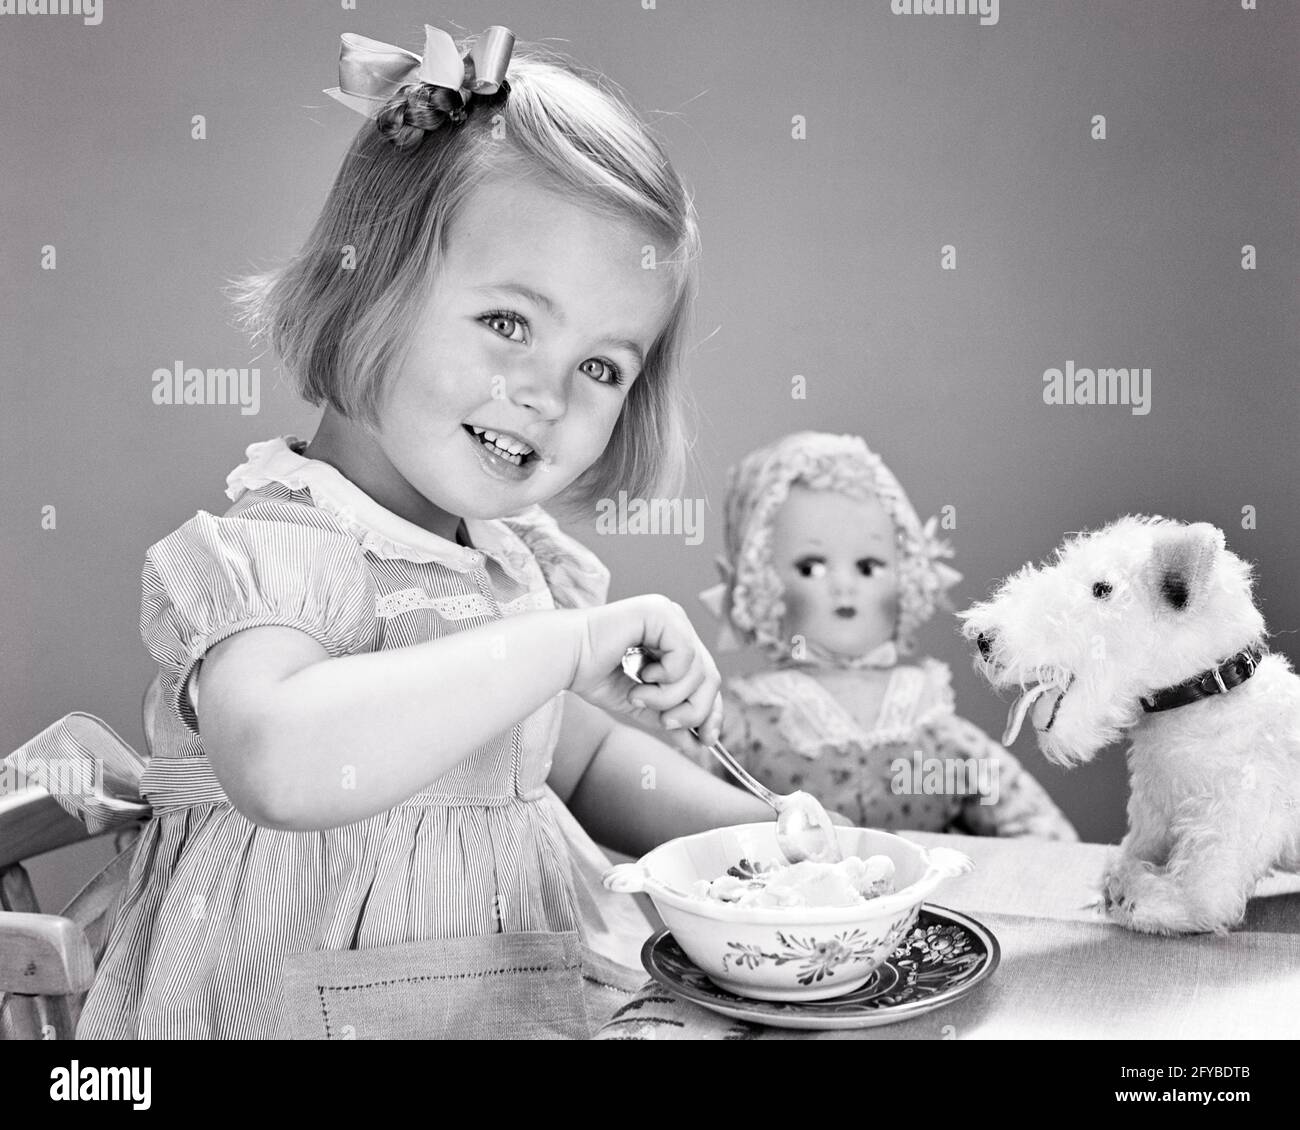 1940s 1950s SMILING GIRL BOW IN HAIR EATING BOWL OF ICE CREAM LOOKING AT CAMERA SURROUNDED BY STUFFED ANIMAL DOG AND DOLL TOYS  - f2693 HAR001 HARS JOY LIFESTYLE FEMALES WINNING STUDIO SHOT STUFFED HEALTHINESS HOME LIFE COPY SPACE HALF-LENGTH B&W HUMOROUS HAPPINESS CHEERFUL AND NUTRITION SURROUNDED COMICAL BY SMILES COMEDY CONSUME CONSUMING JOYFUL NOURISHMENT STYLISH ICE CREAM PLEASANT AGREEABLE CHARMING GROWTH JUVENILES LOVABLE PLEASING ADORABLE APPEALING BLACK AND WHITE CAUCASIAN ETHNICITY HAR001 OLD FASHIONED Stock Photo